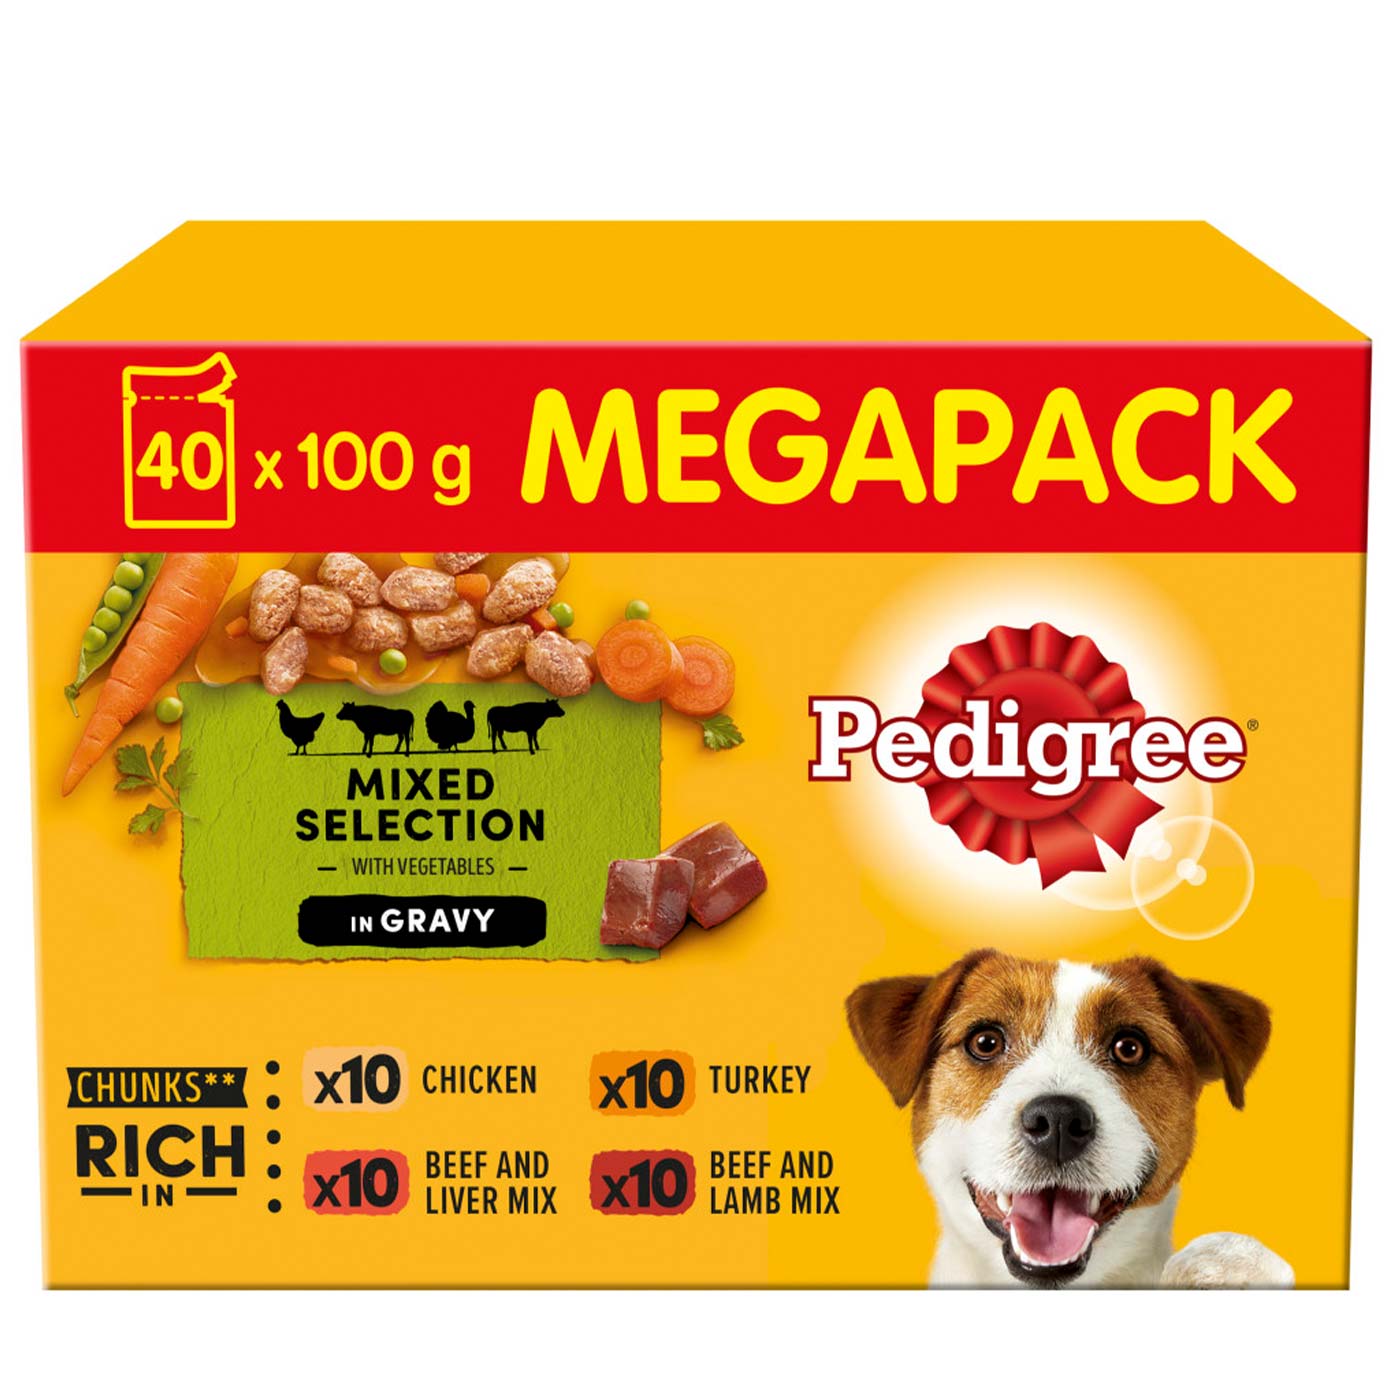 Pedigree Adult Dog Pouches Mixed Selection in Gravy Mega Pack (40x100g)